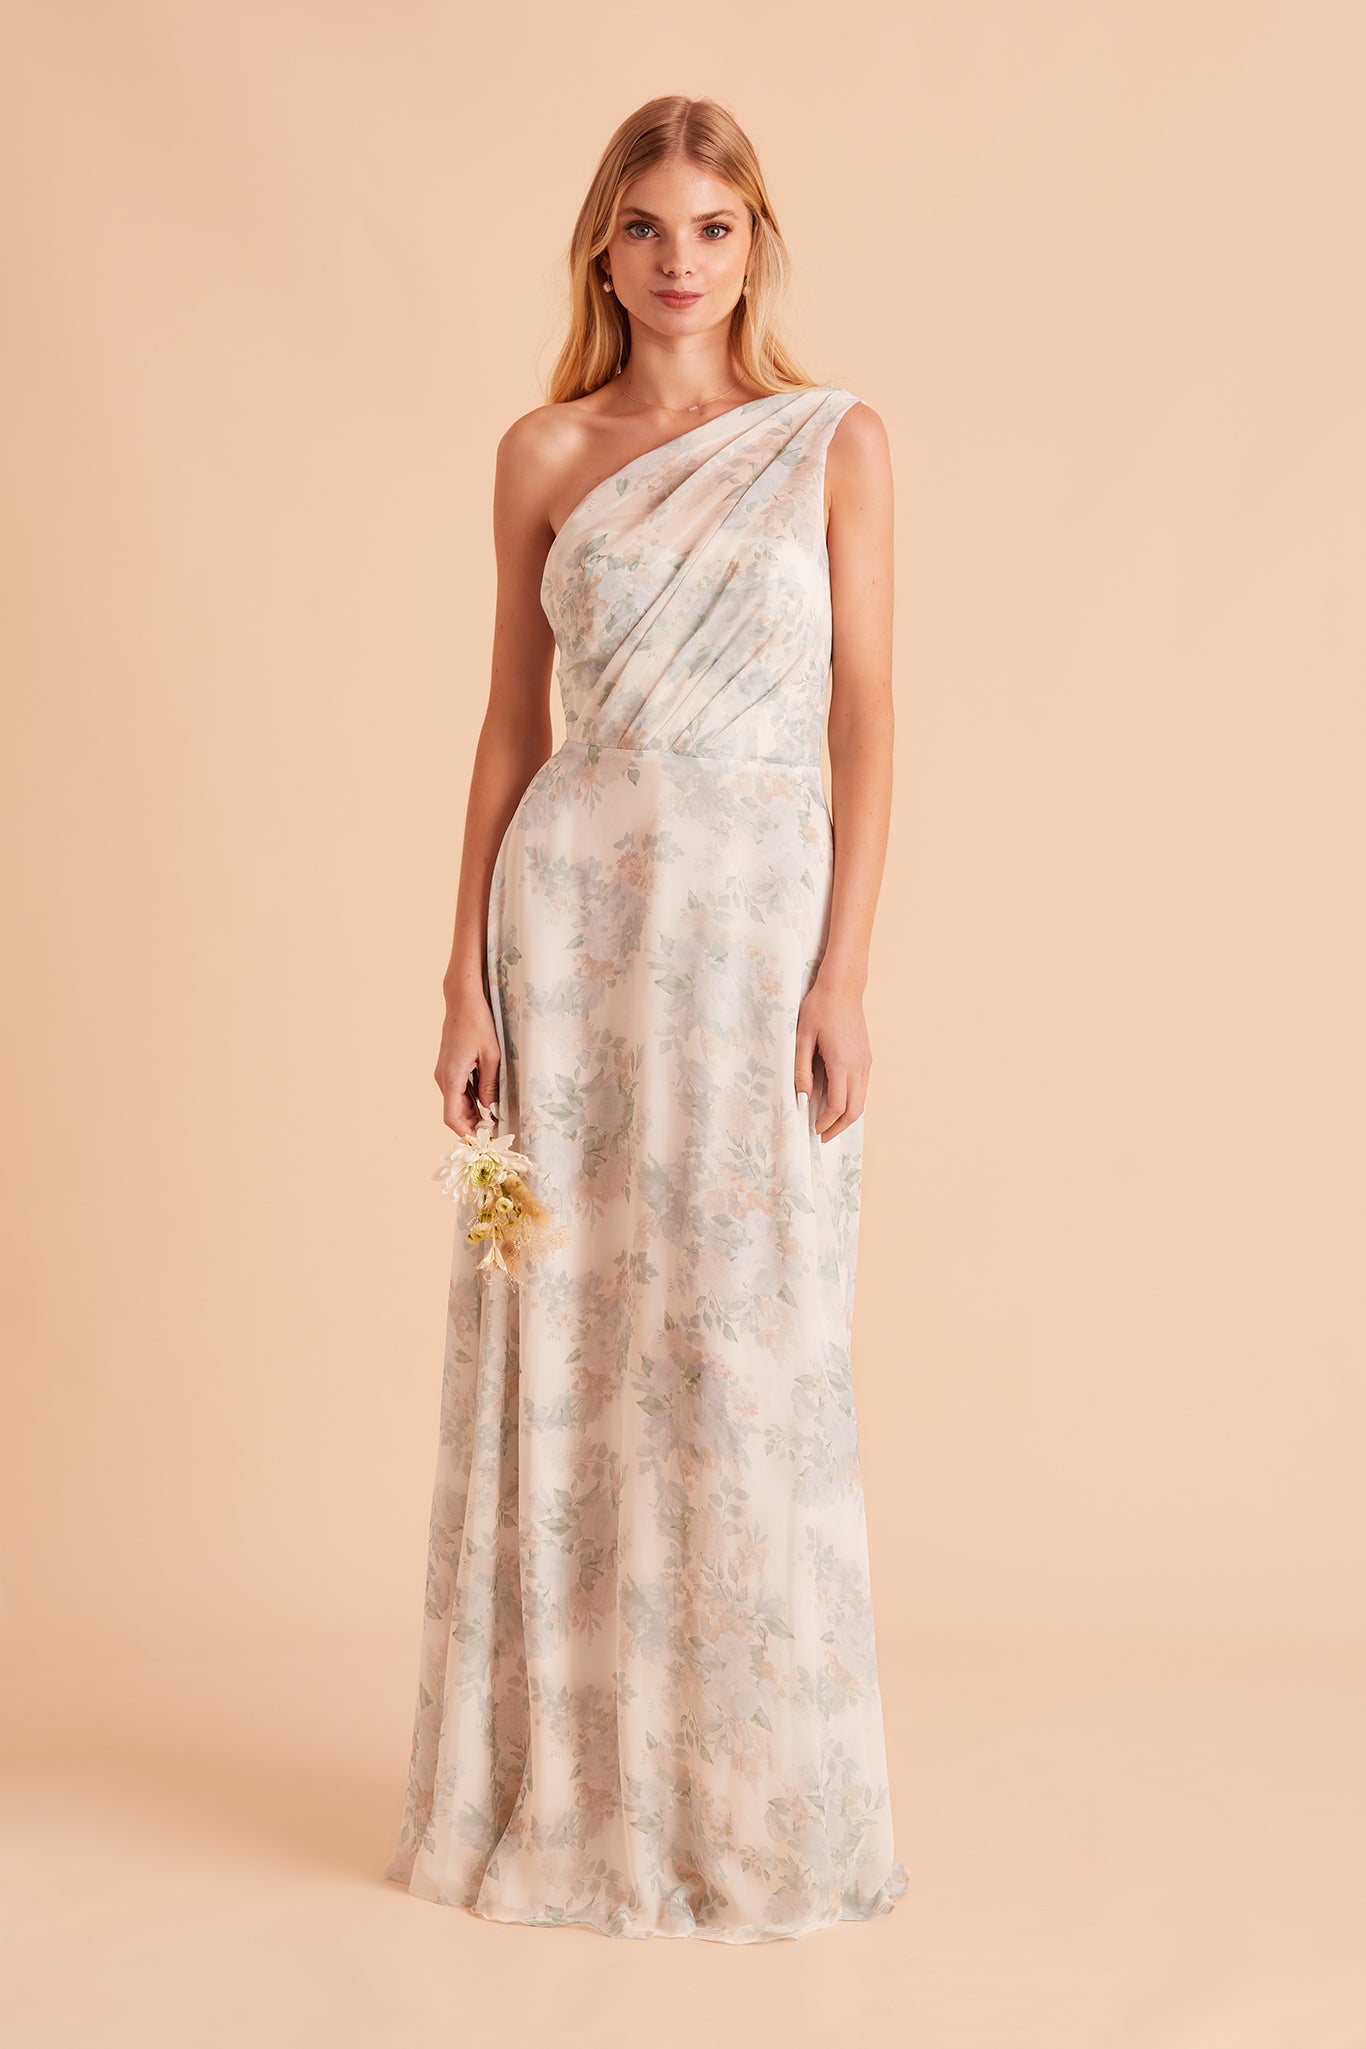 Kira bridesmaid dress in sage bouquet floral print chiffon by Birdy Grey, front view